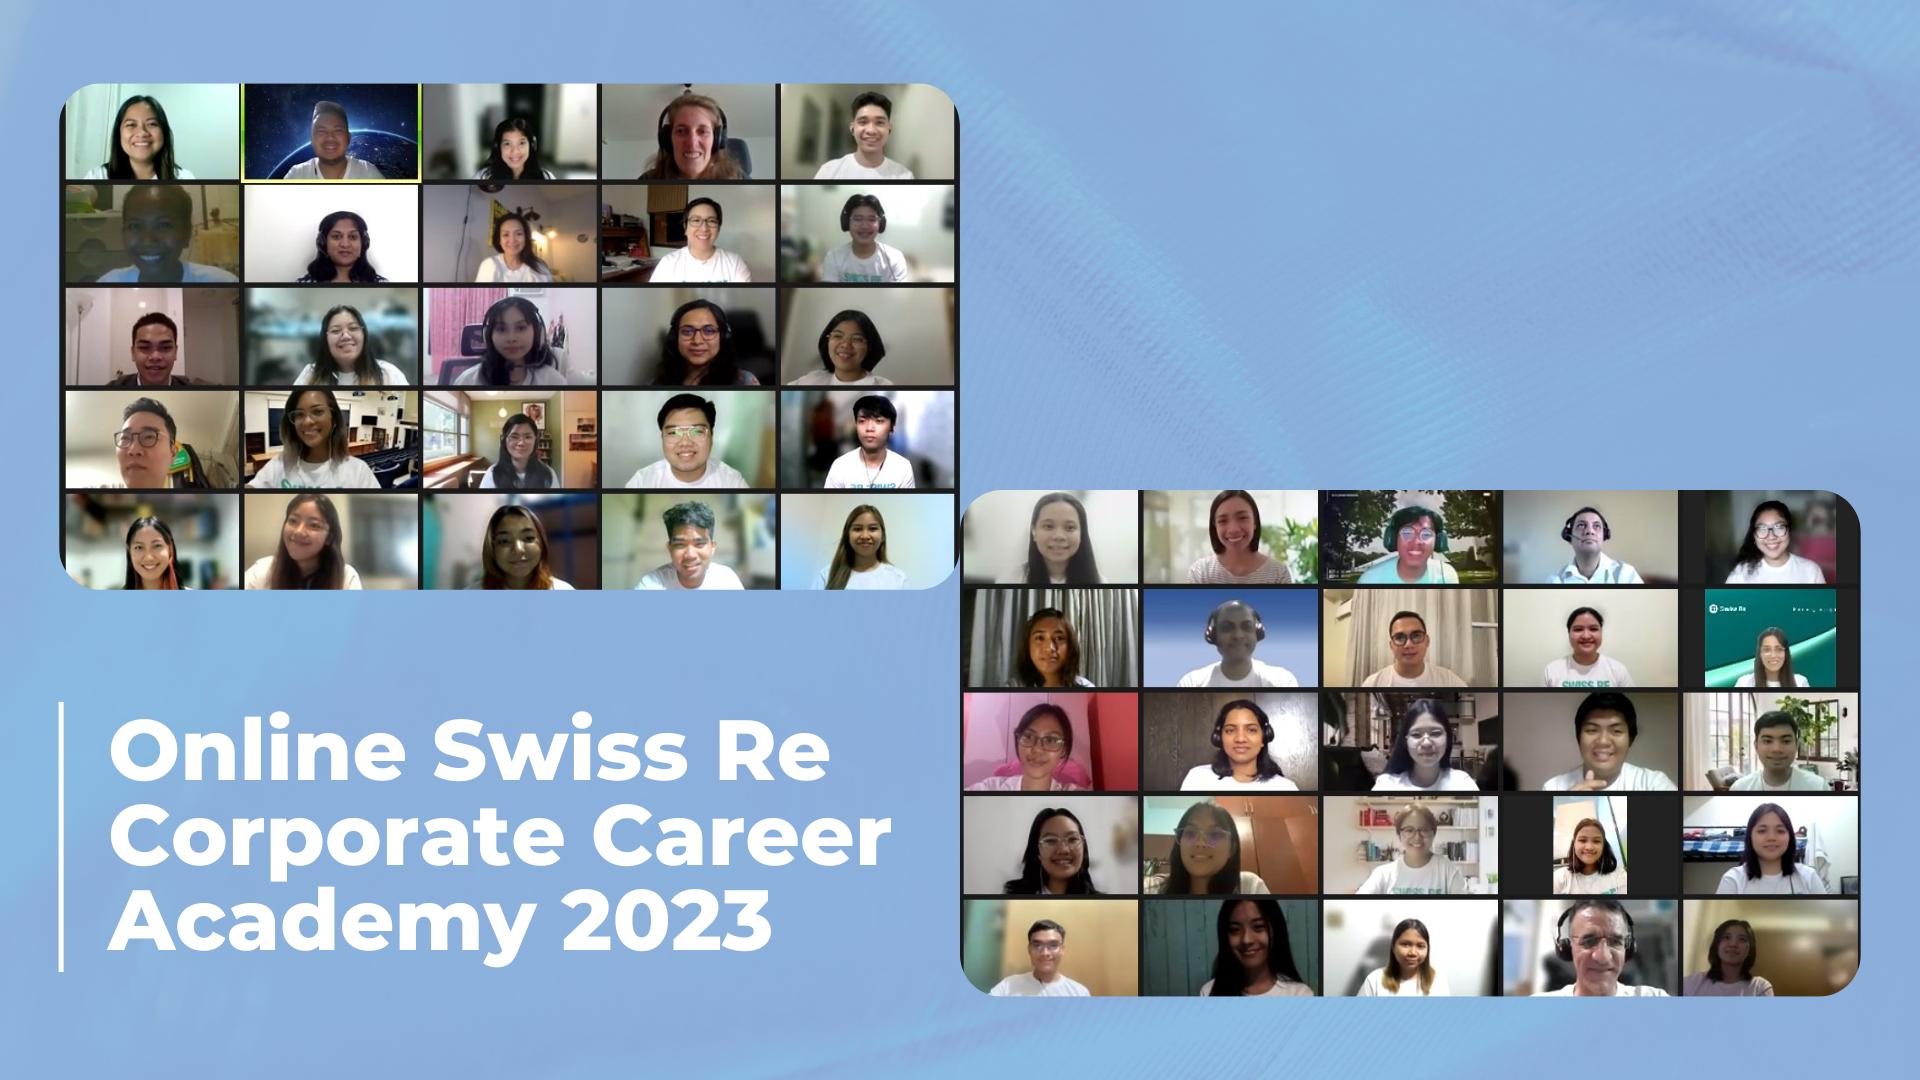 Pathways students, Aiducation International staff, Swiss Re staff, and corporate guests pose in this screenshot of the Zoom call.